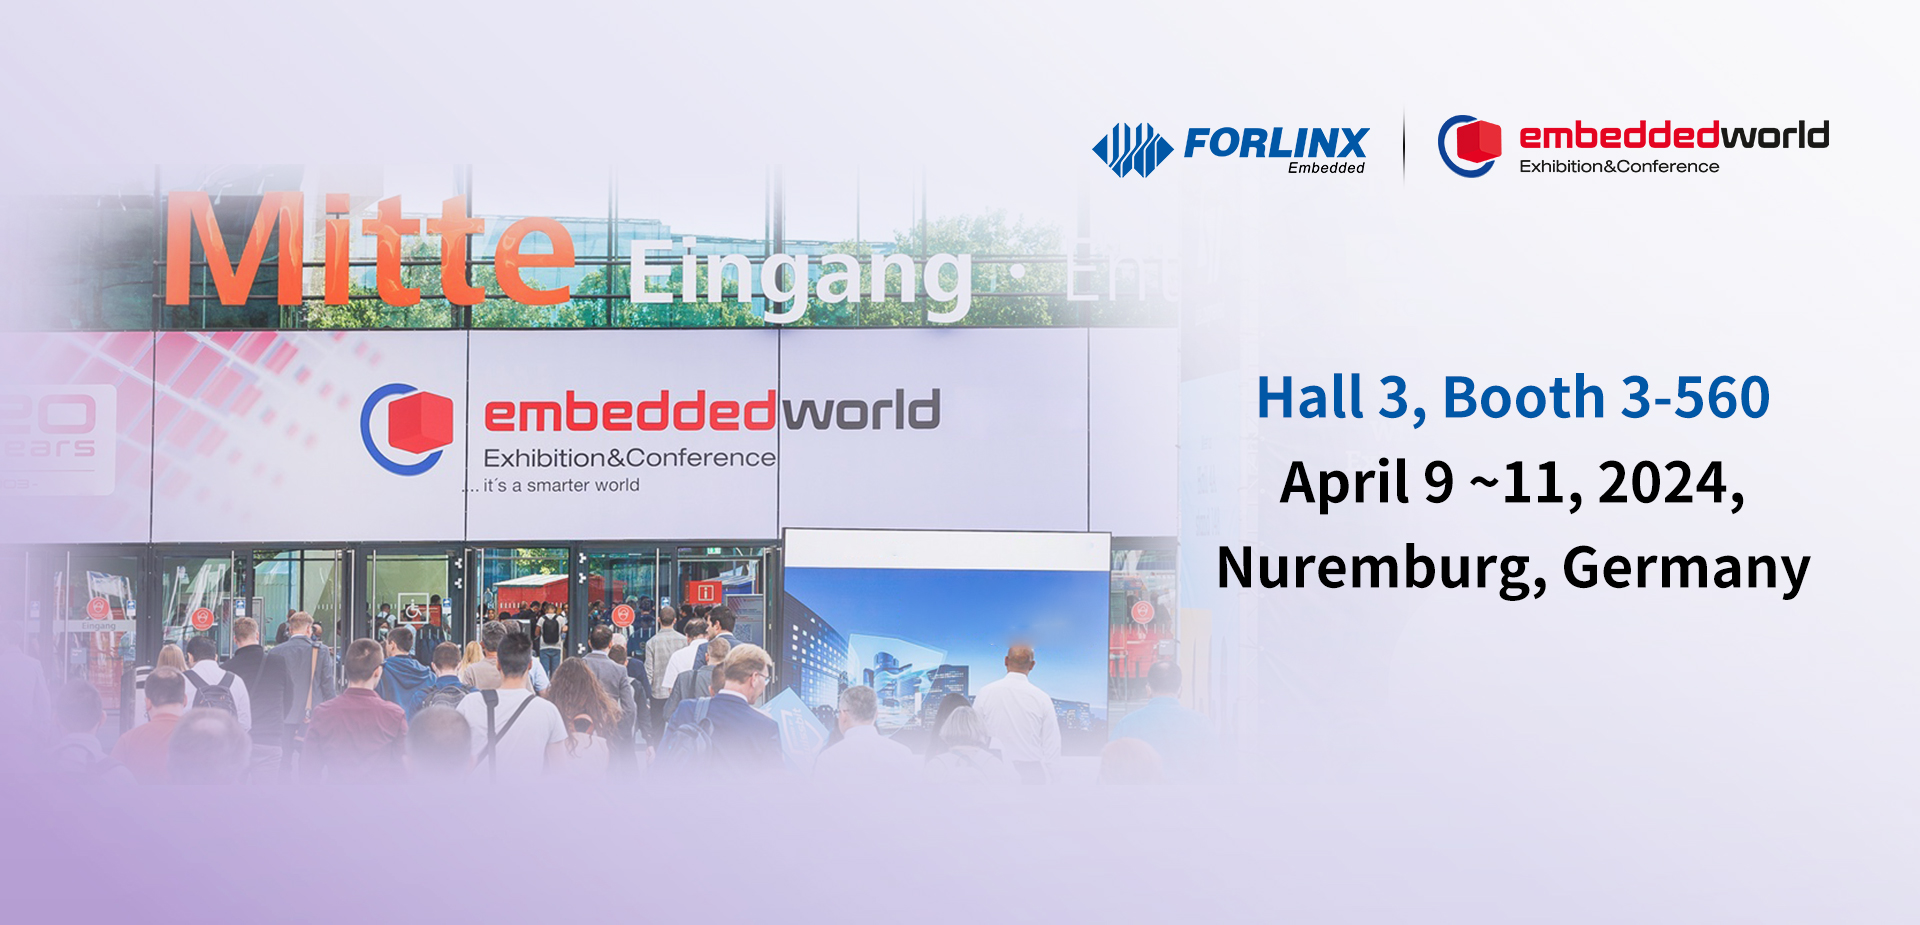 Forlinx Embedded to Showcase at 2024 Embedded World Exhibition in Nuremberg, Germany